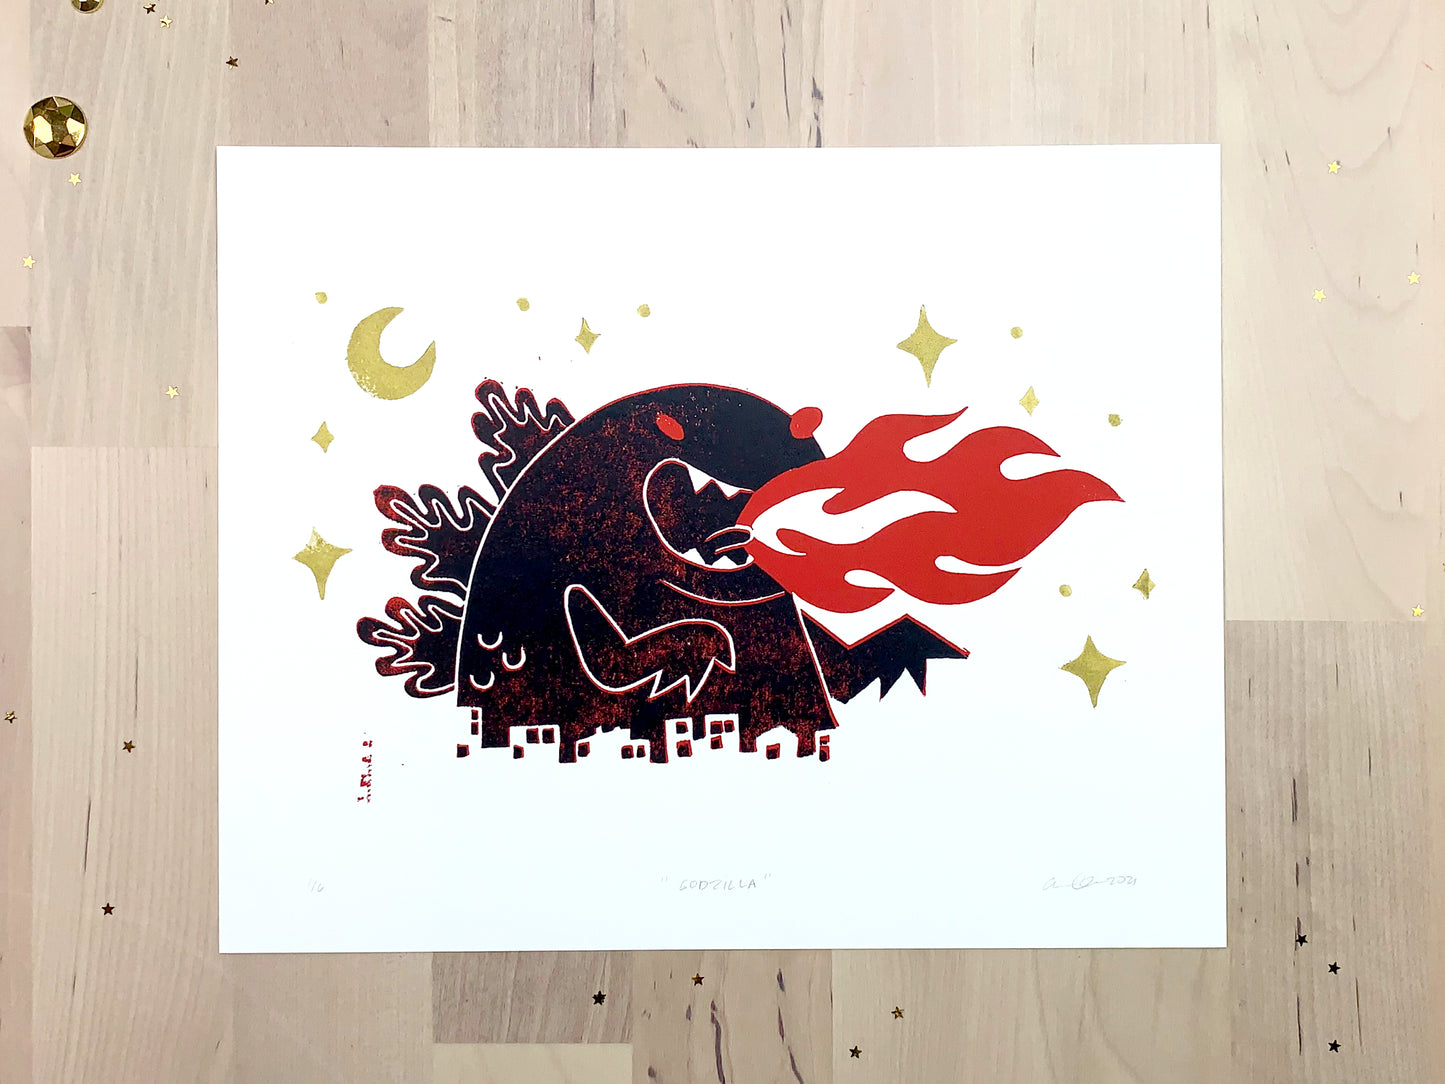 Original limited edition #1 art print by Amber Orenstein. Two color, red and black, reduction block print of a Japanese kaiju monster roaring with flames while destroying a city with gold stars and moon.